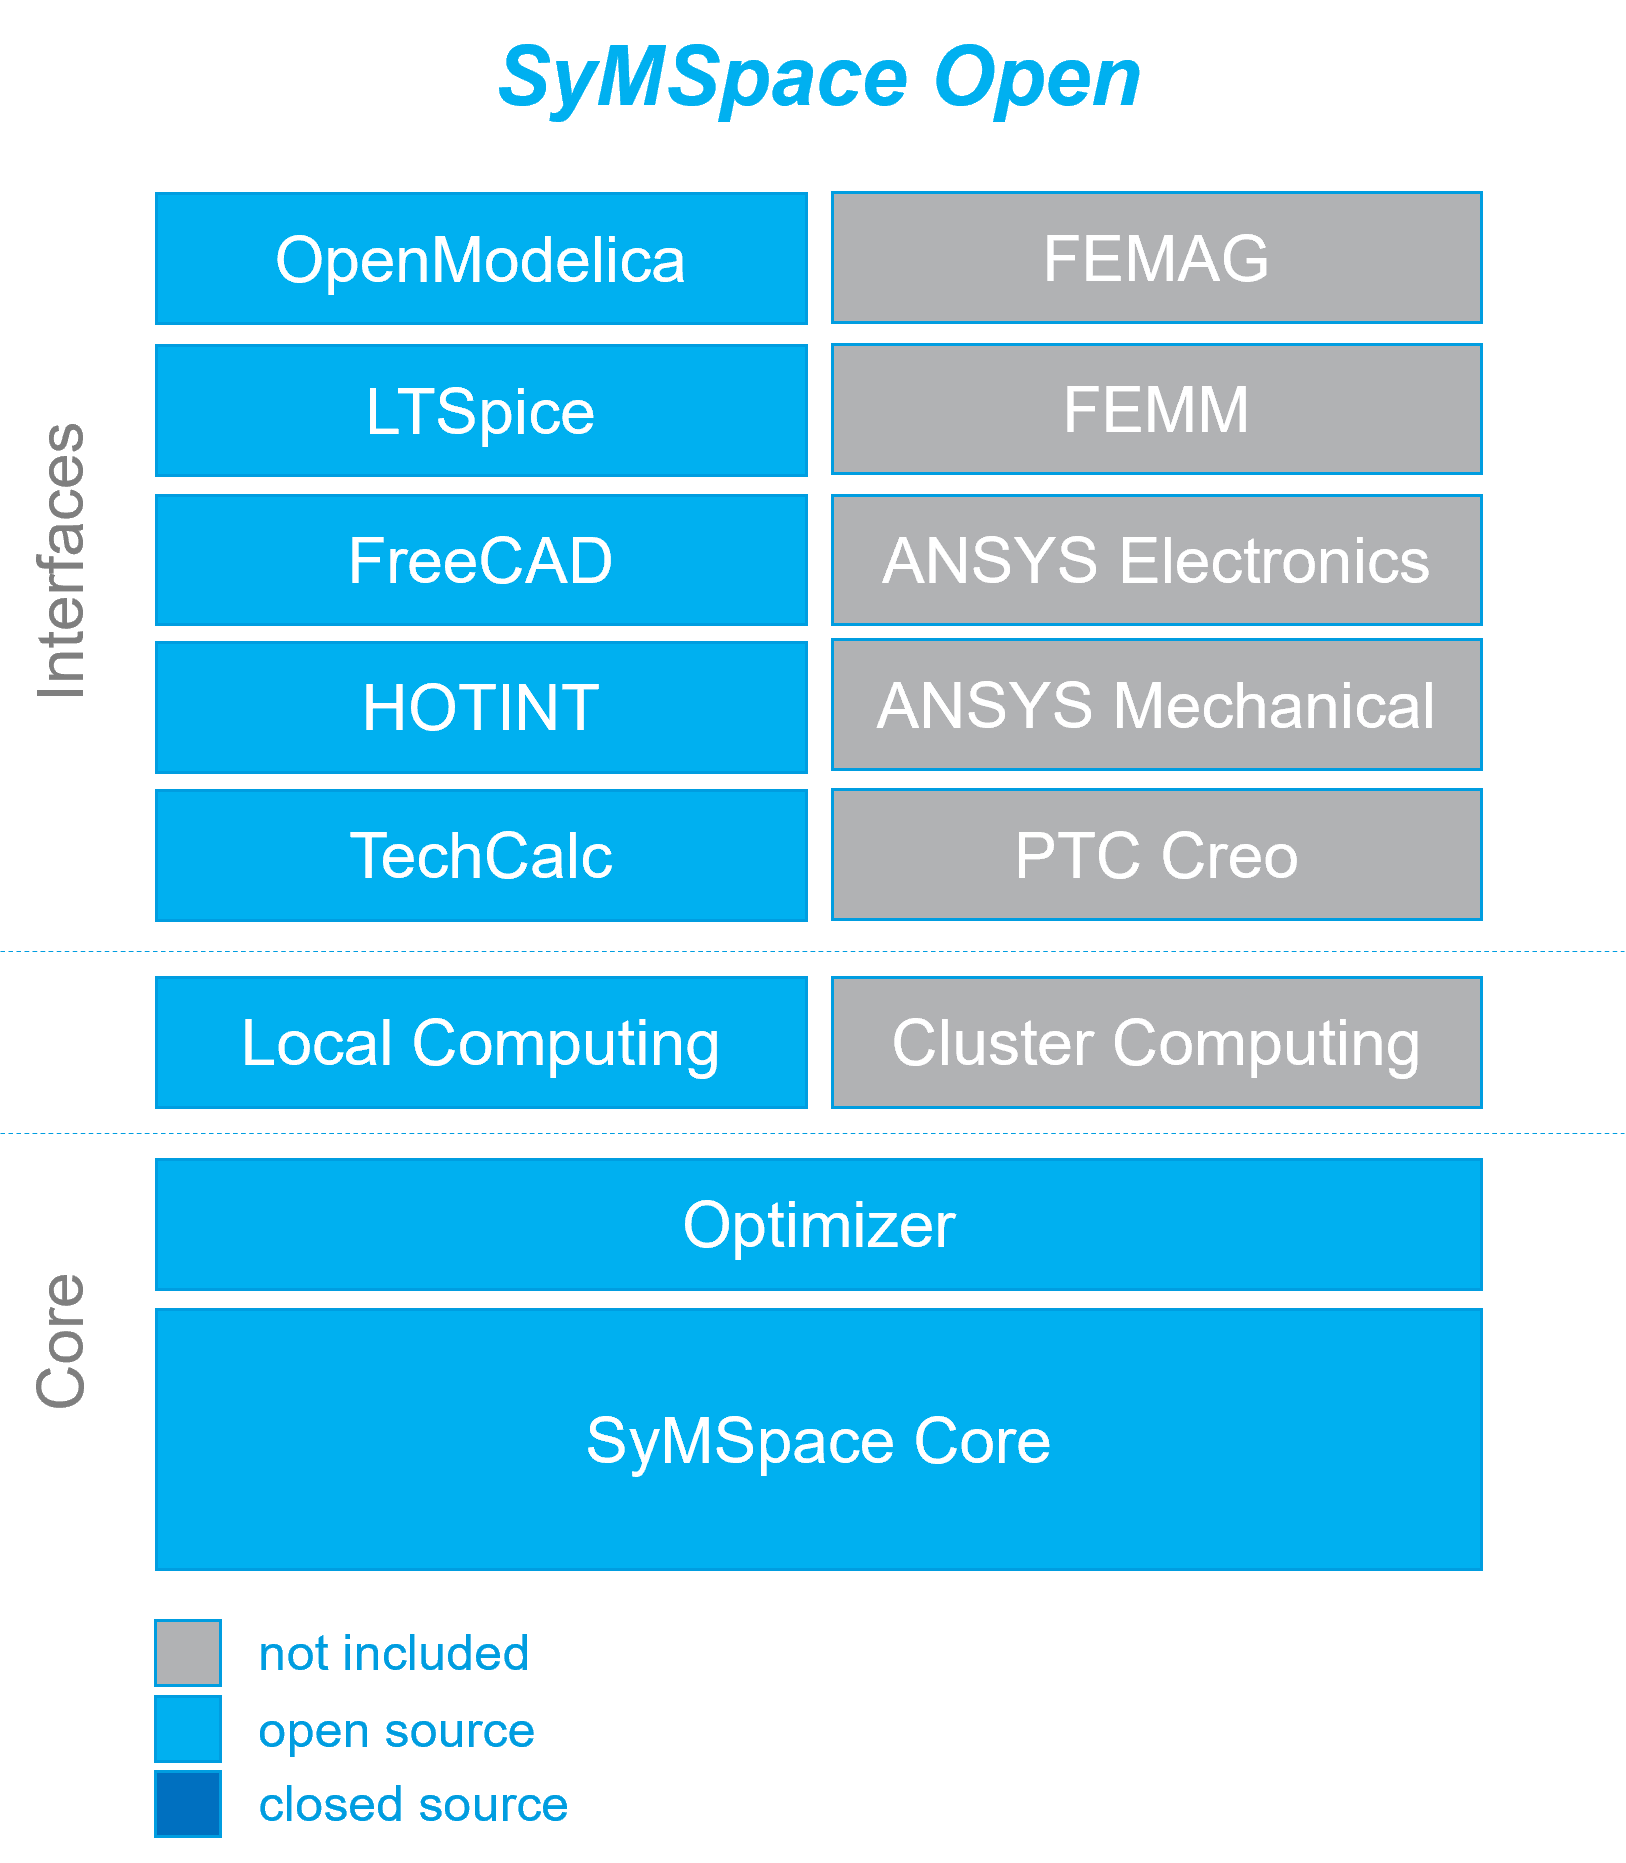 Contents of SyMSpace Open edition